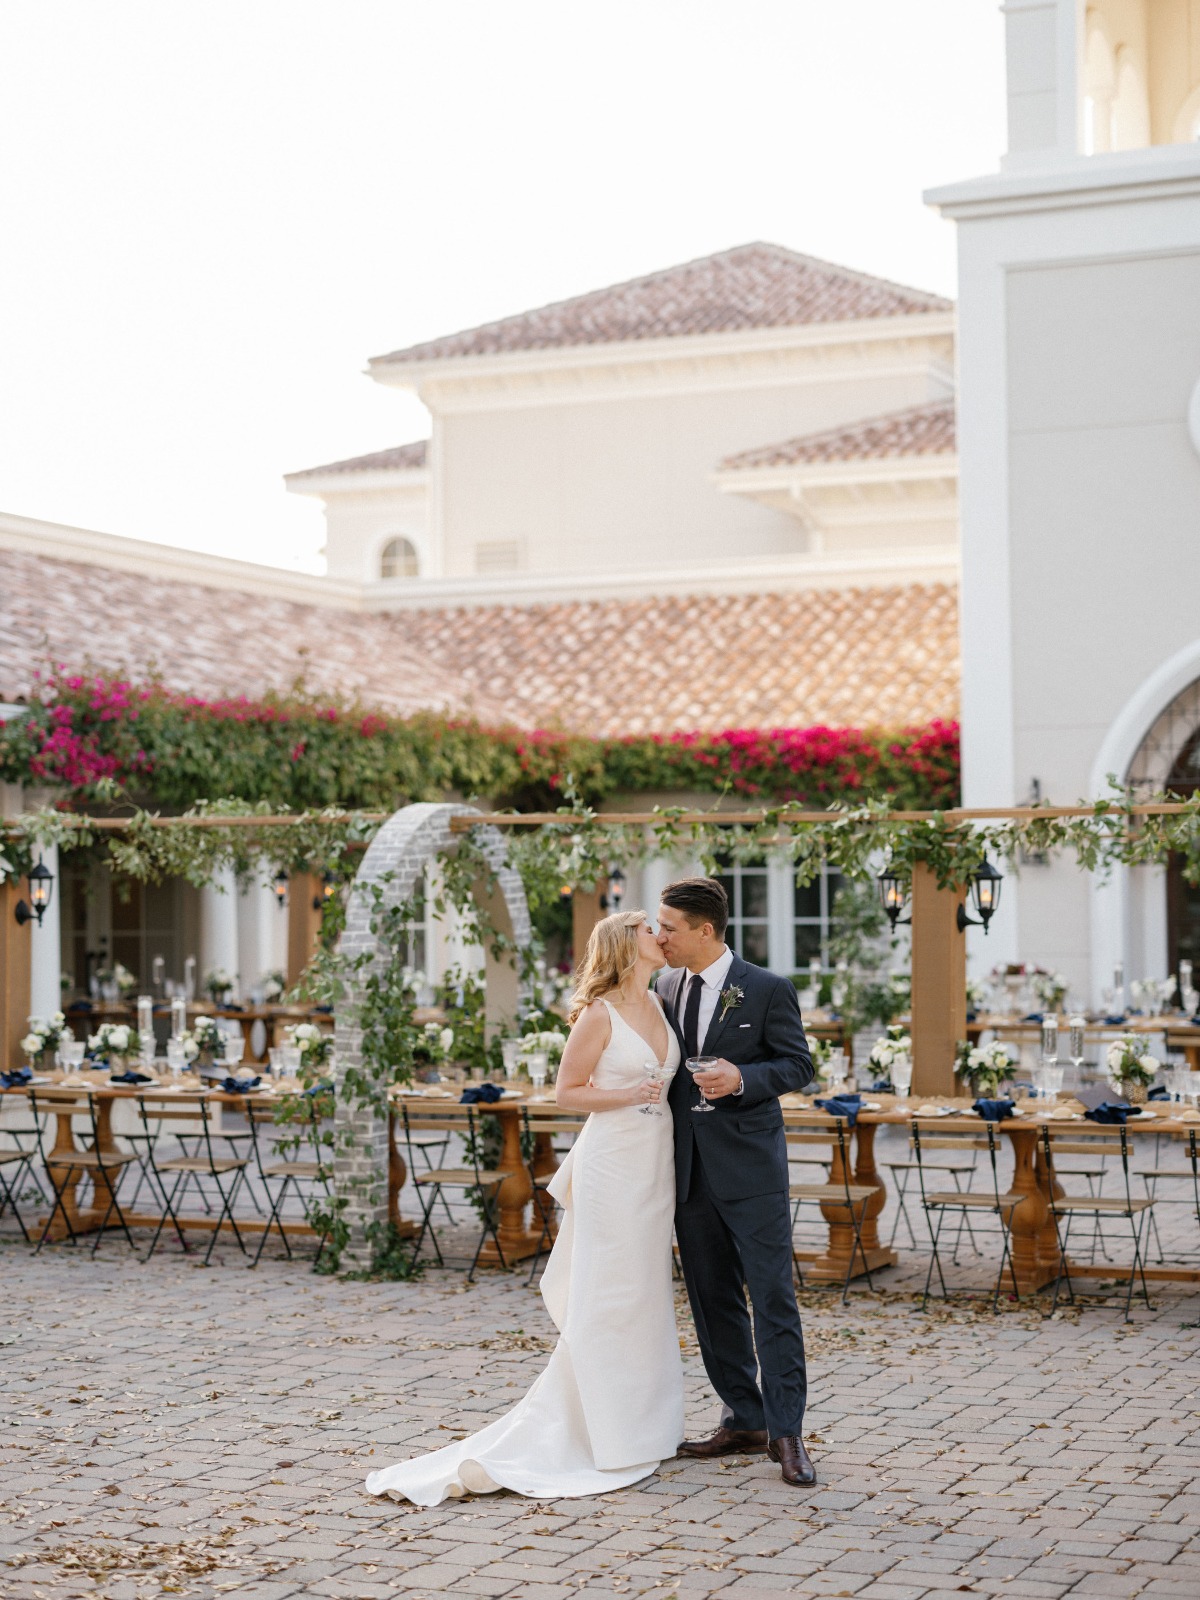 italian outdoor wedding with brick accents